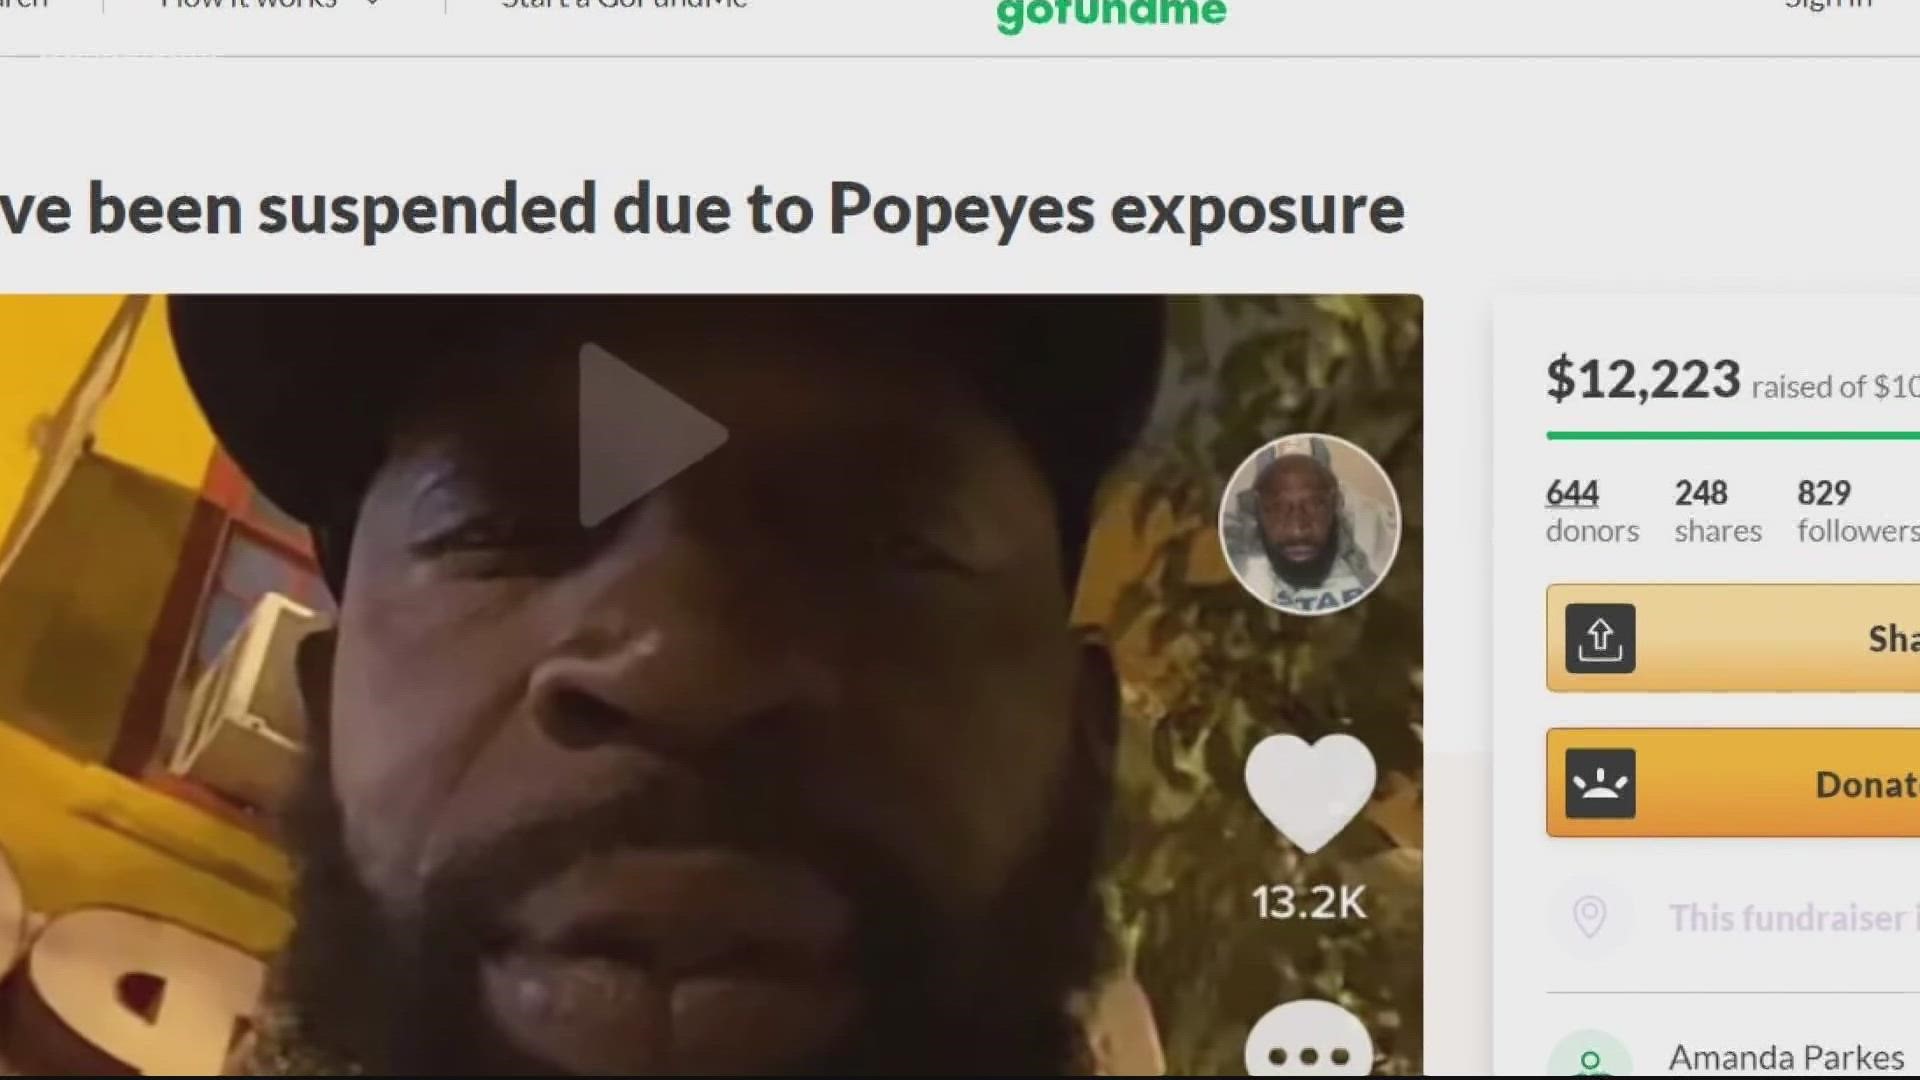 The man who recorded the viral Popeyes rat video says he was suspended from his job. GoFundMe verified that he has a donation page.